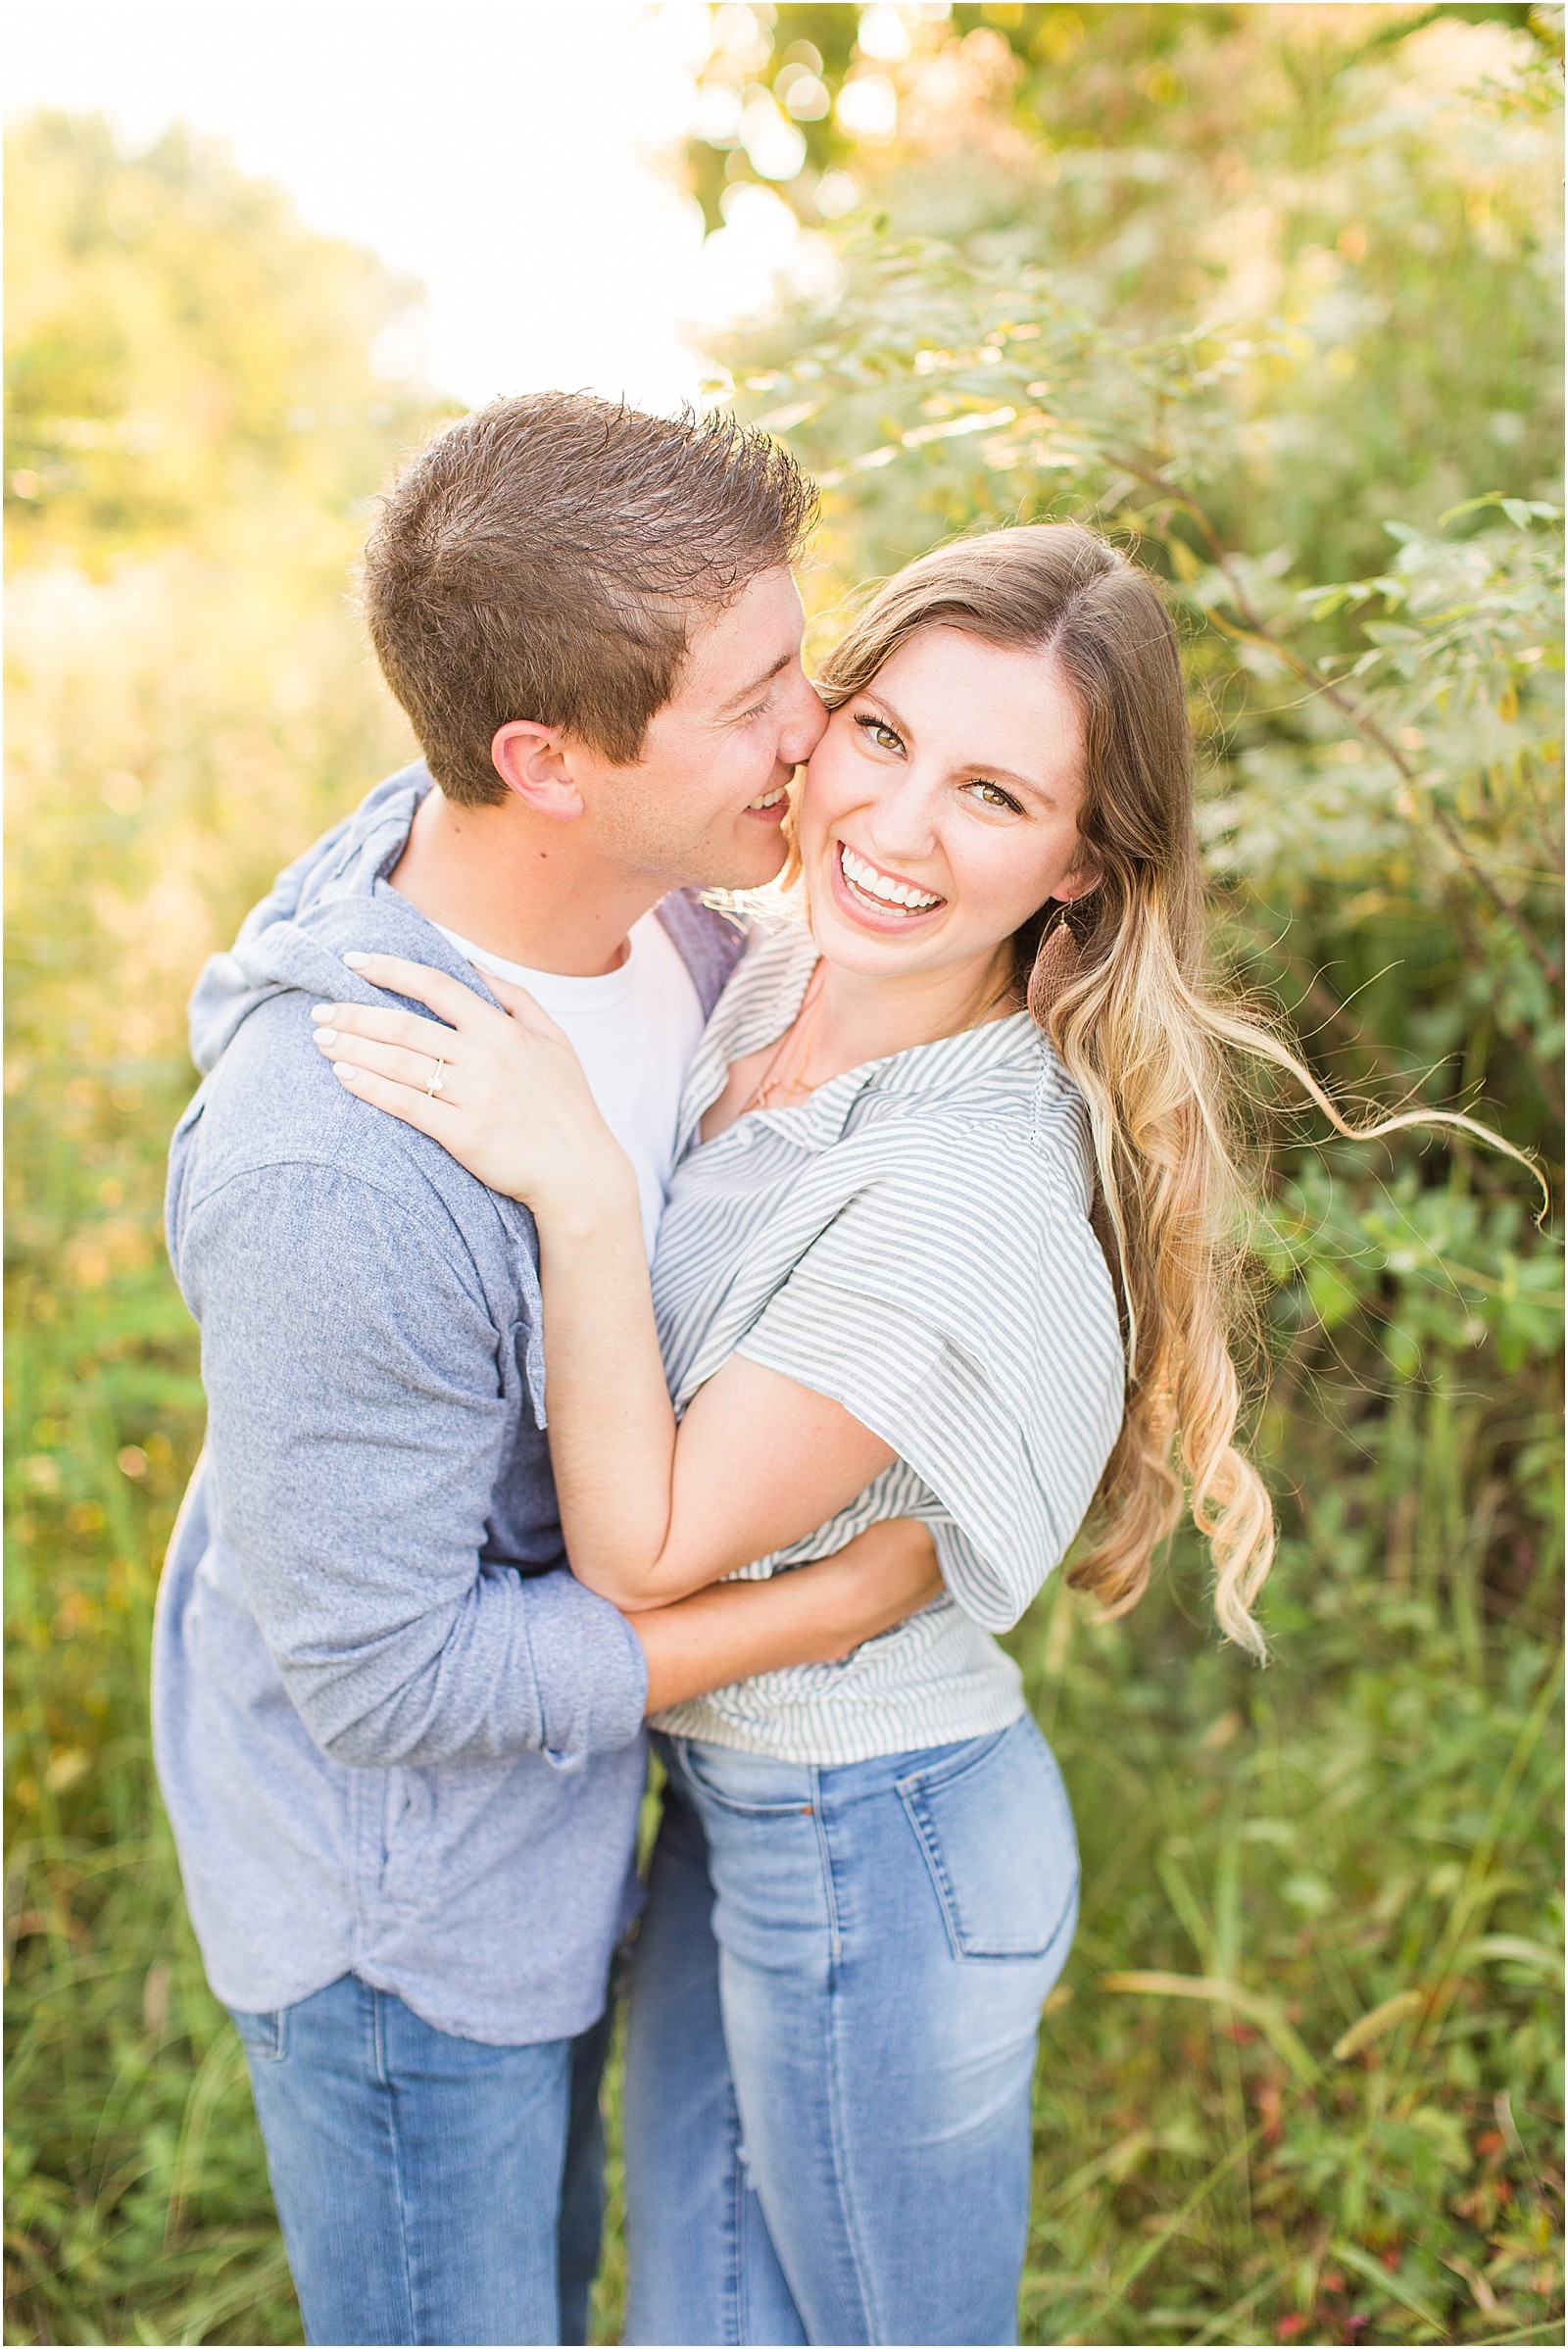 A Jasper Indiana Engagement Session | Tori and Kyle | Bret and Brandie Photography011.jpg